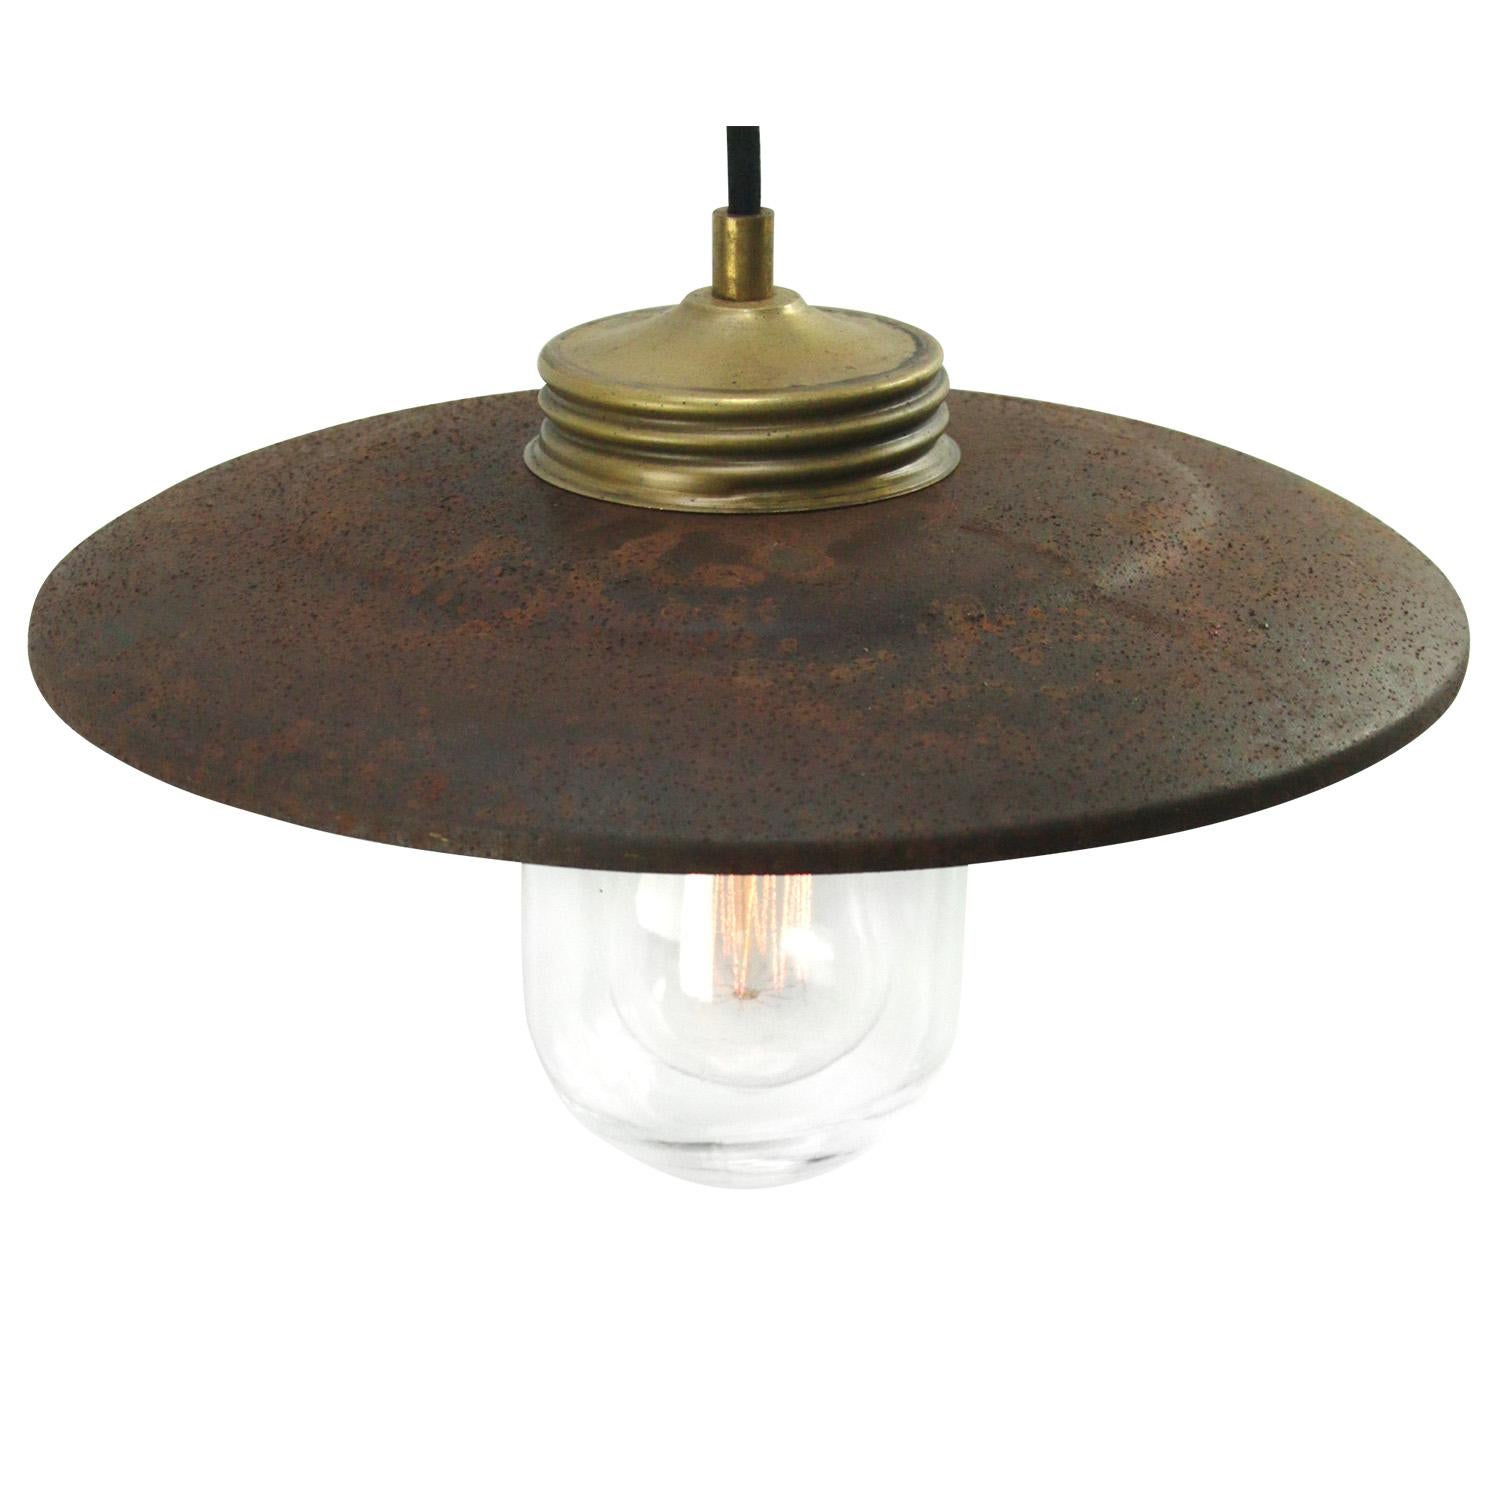 Rust iron Industrial hanging lamp.
Clear glass with brass top.

Weight: 1.20 kg / 2.6 lb

Priced per individual item. All lamps have been made suitable by international standards for incandescent light bulbs, energy-efficient and LED bulbs.